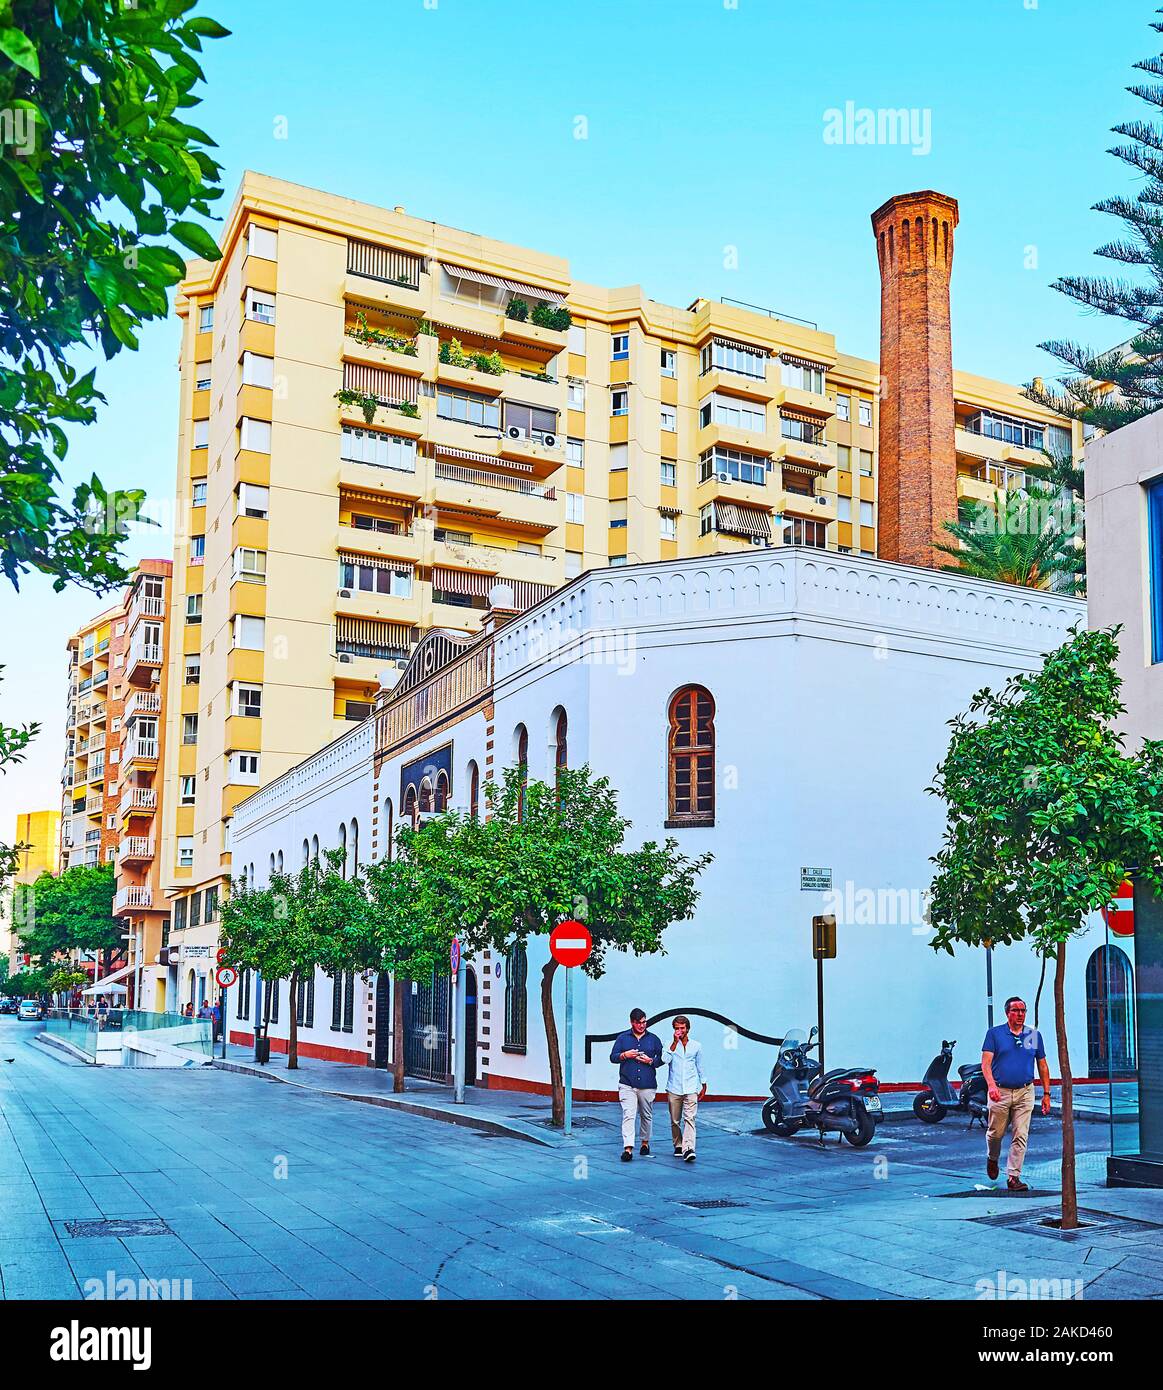 MALAGA, SPAIN - SEPTEMBER 26, 2019: Walk Calle Maestranza (street), lined with modern residential high rises and green trees with a view on extant bui Stock Photo